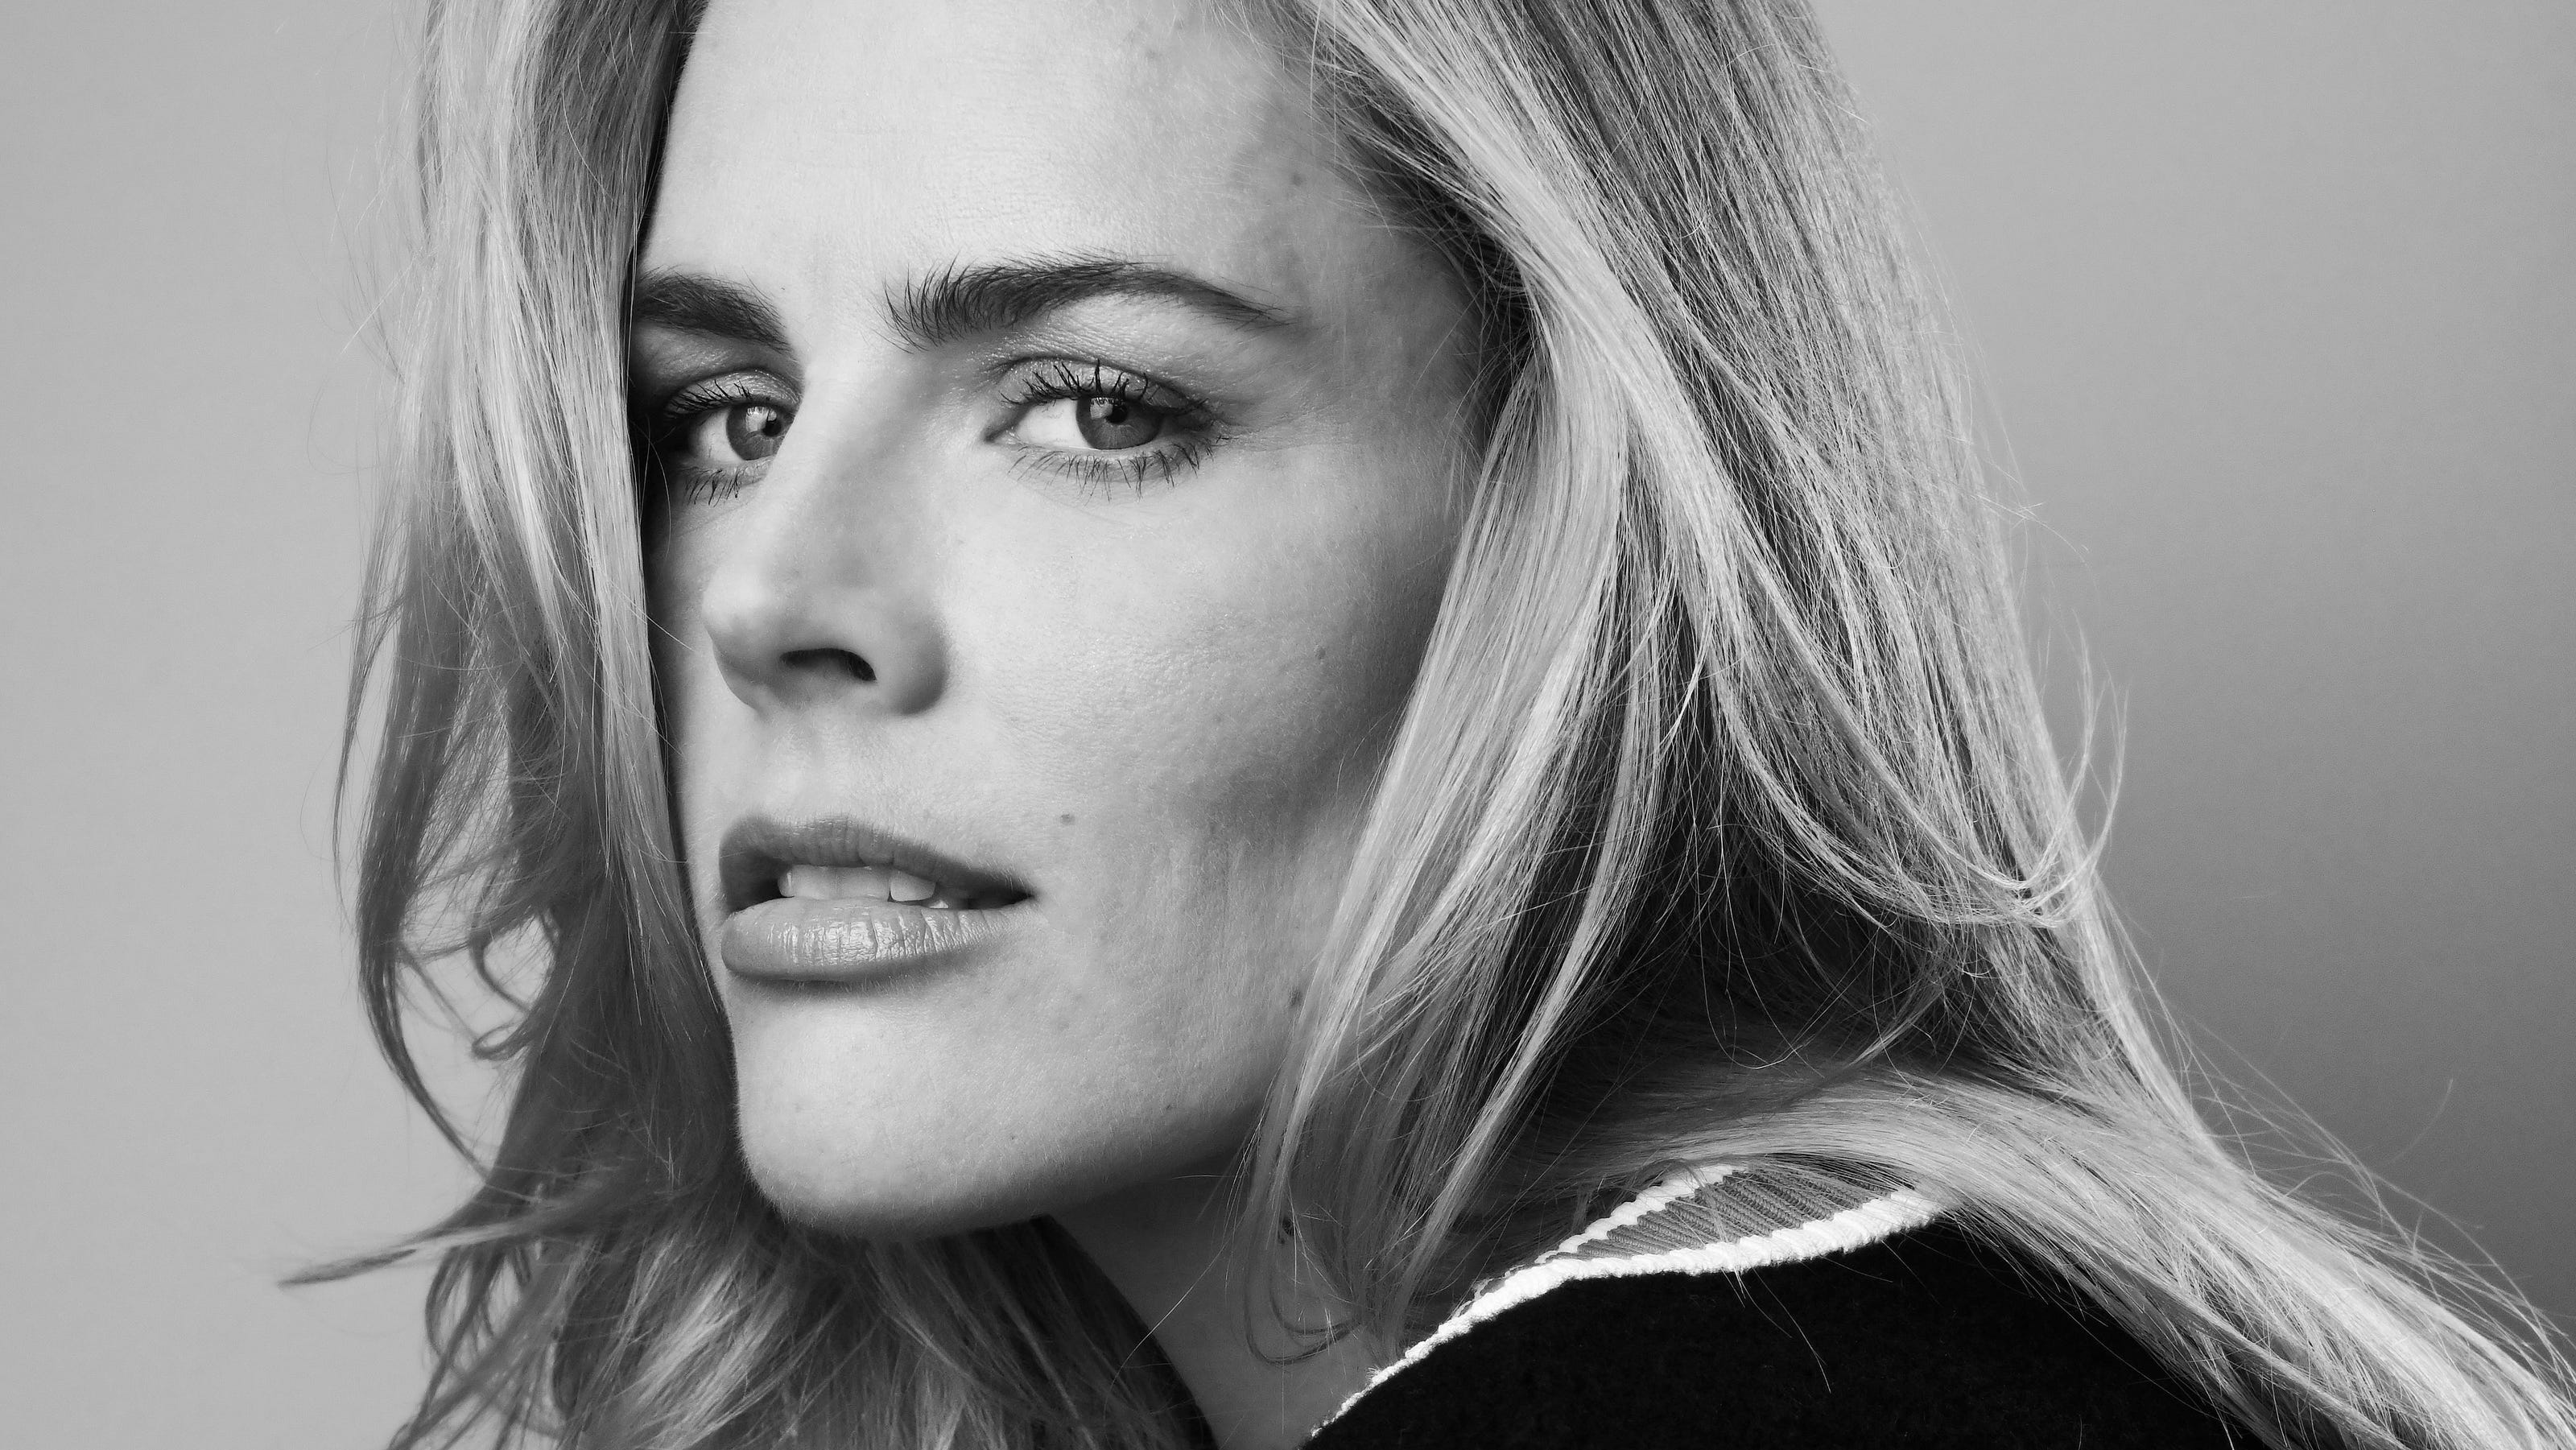 Busy Philipps talks ADHD diagnosis, being labeled as 'ditzy' as a teen: 'I'm actually not at all'